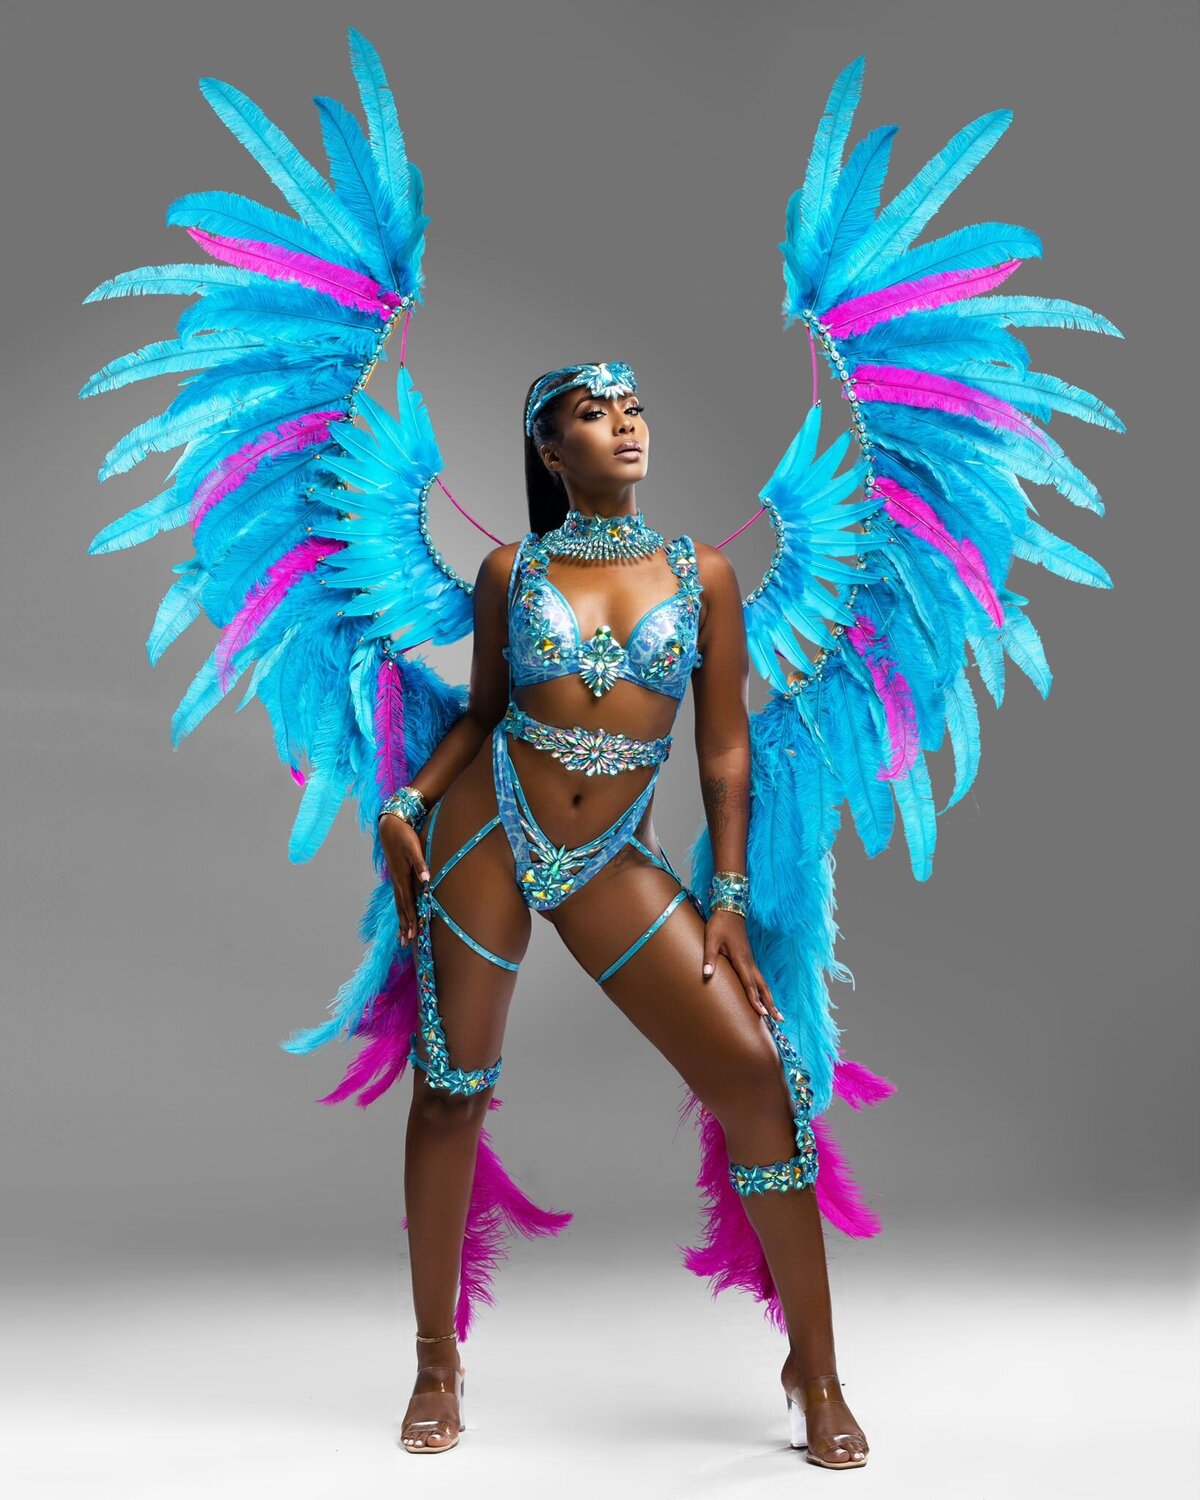 Costume for Caribana Toronto. Register to play mas with Sunlime Mas